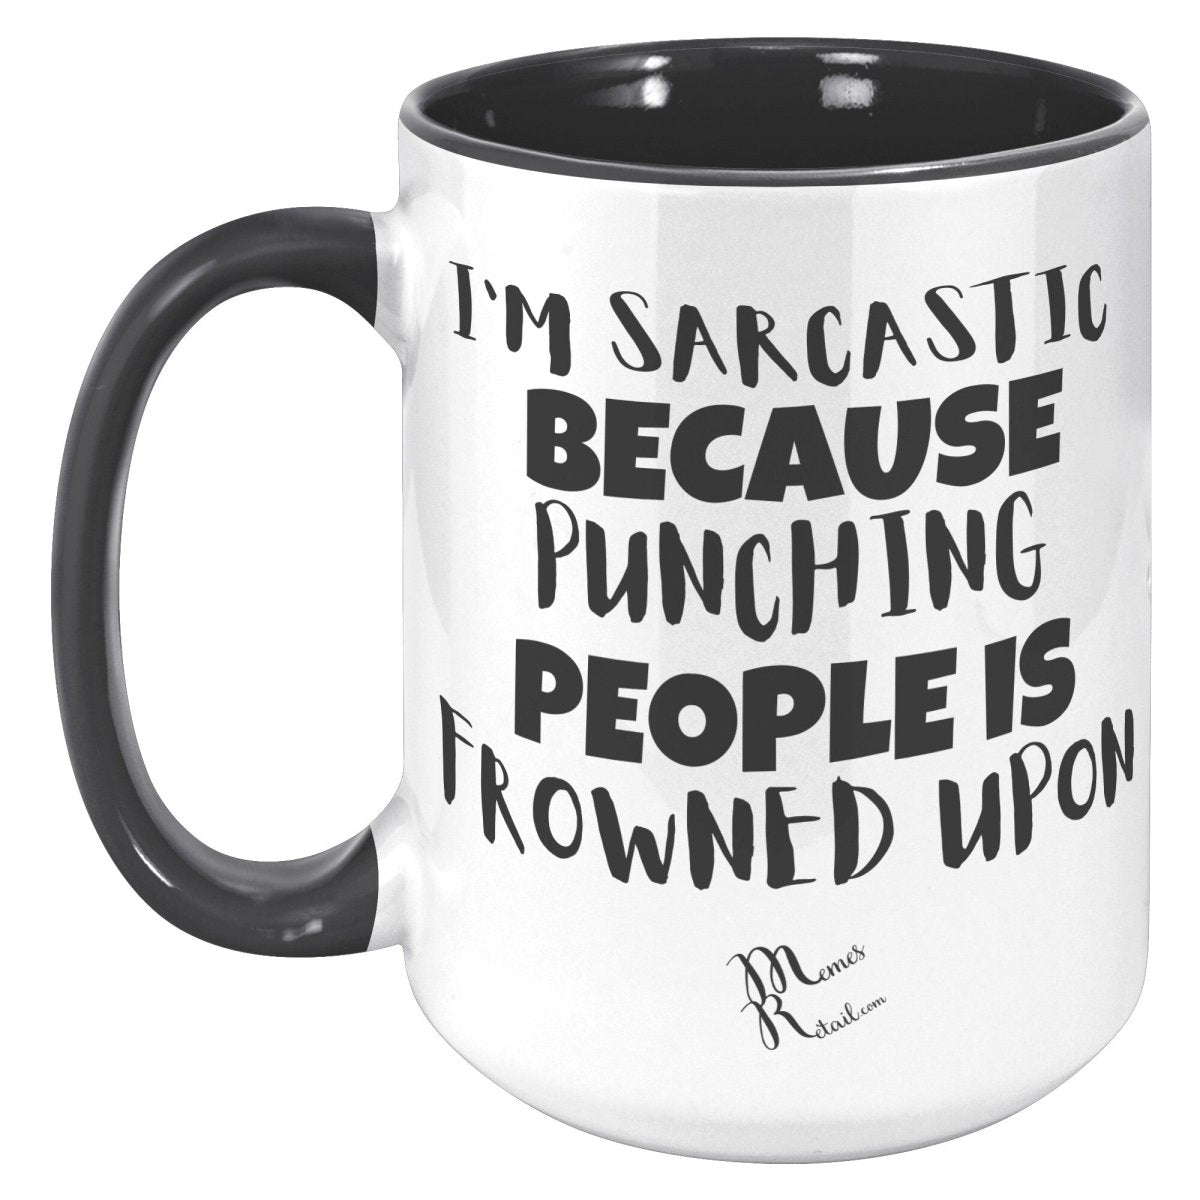 I'm Sarcastic Because Punching People is frowned upon 11oz 15oz Mugs, - MemesRetail.com